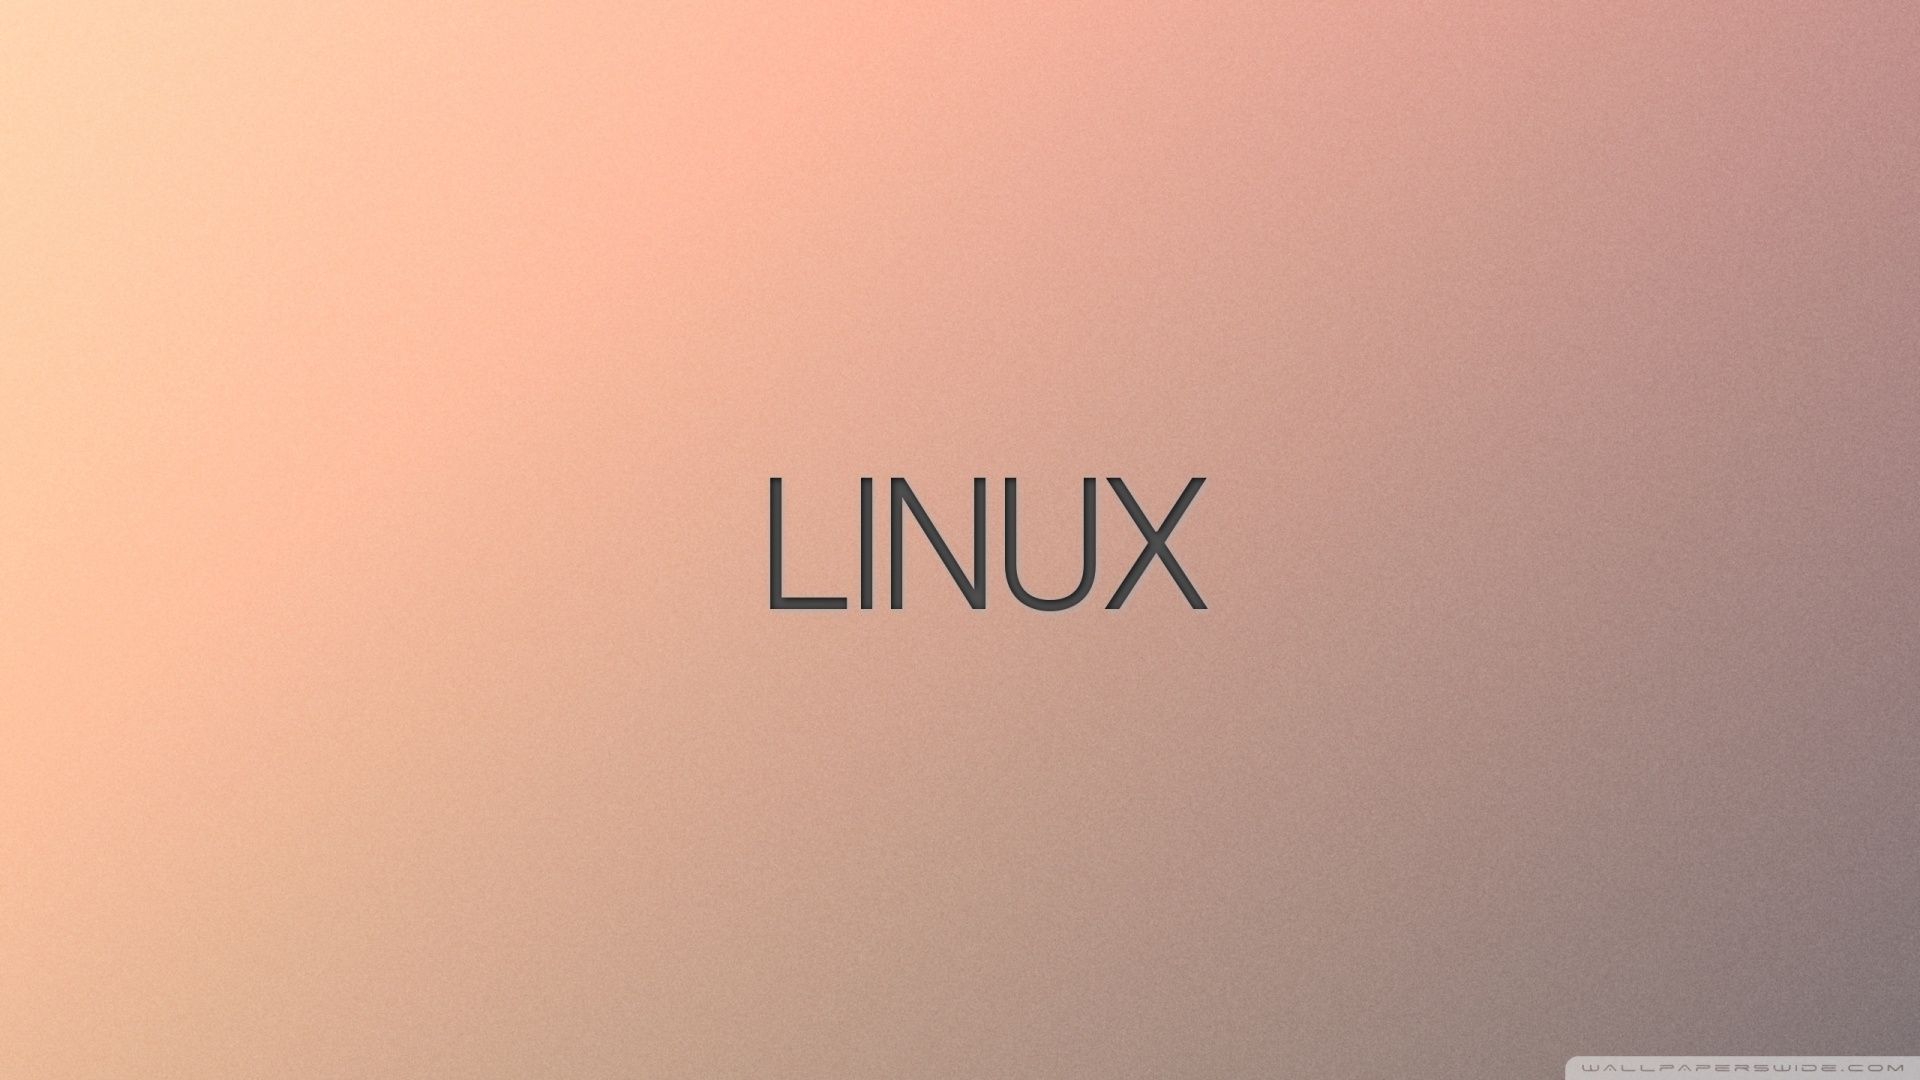 Linux Simple Background Wallpaper 1920x1080 Linux Simple Background